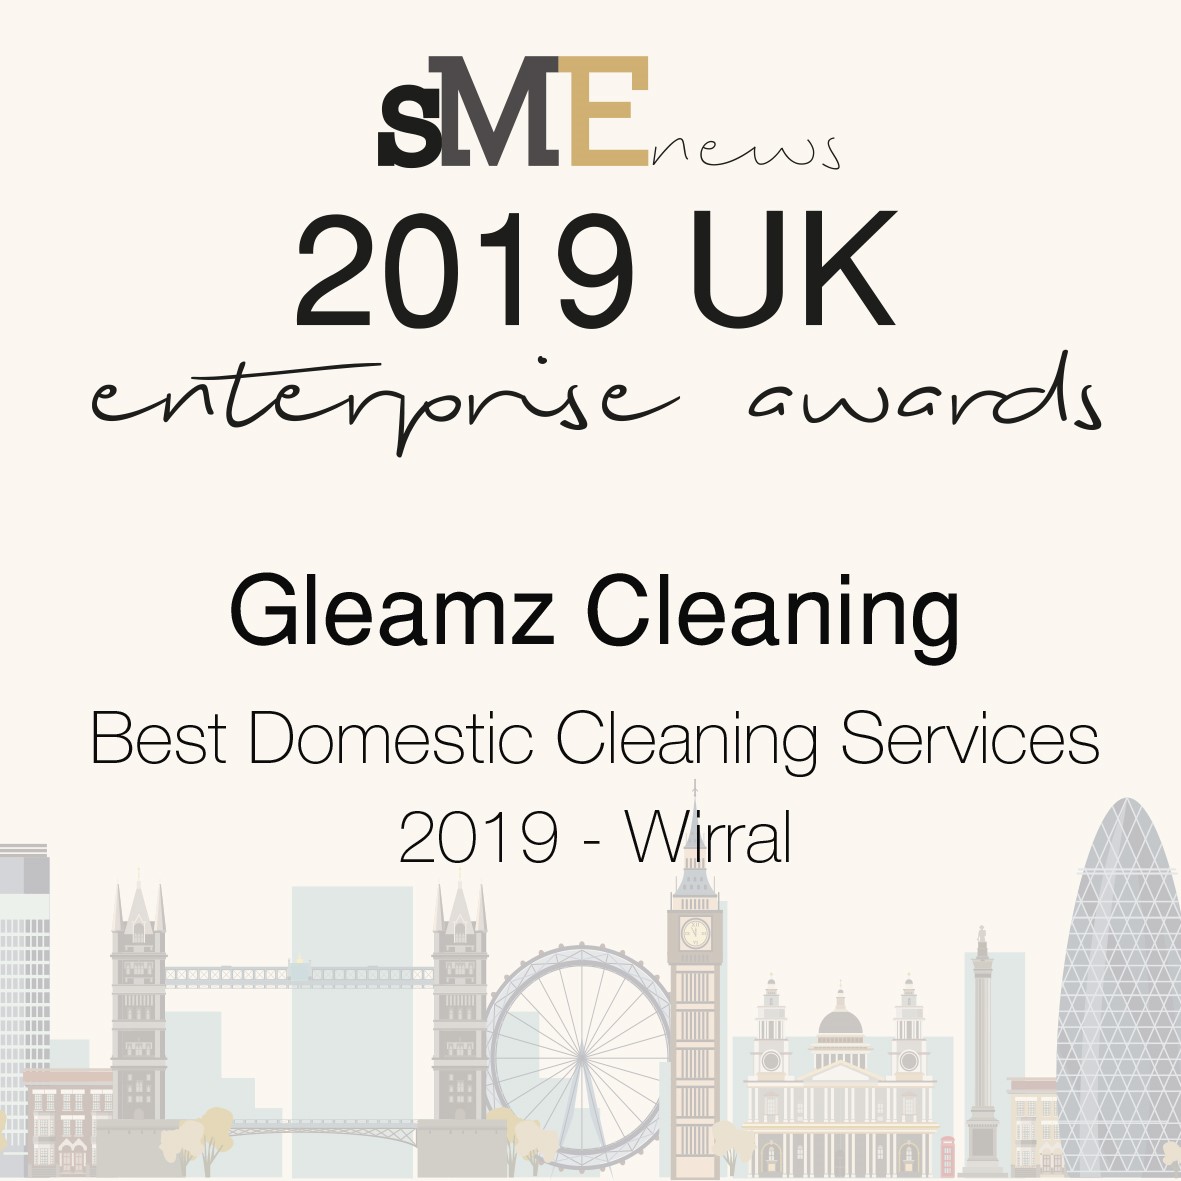 Gleamz Cleaning, Best Domestic Cleaning Services 2019, Wirral